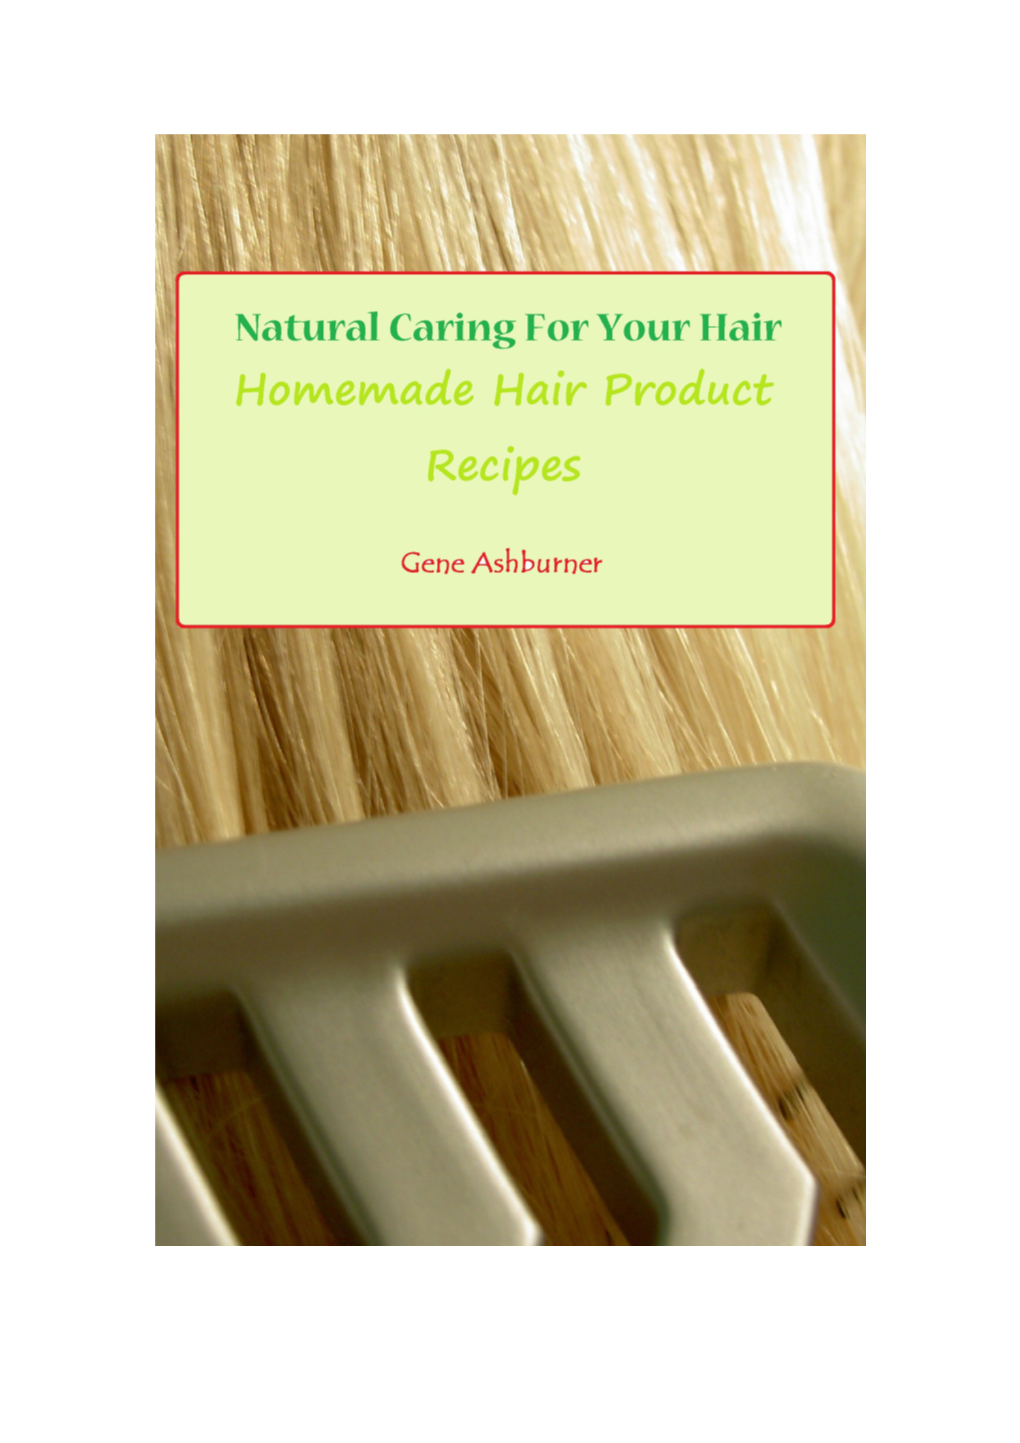 Natural Caring for Your Hair: Homemade Hair Product Recipes